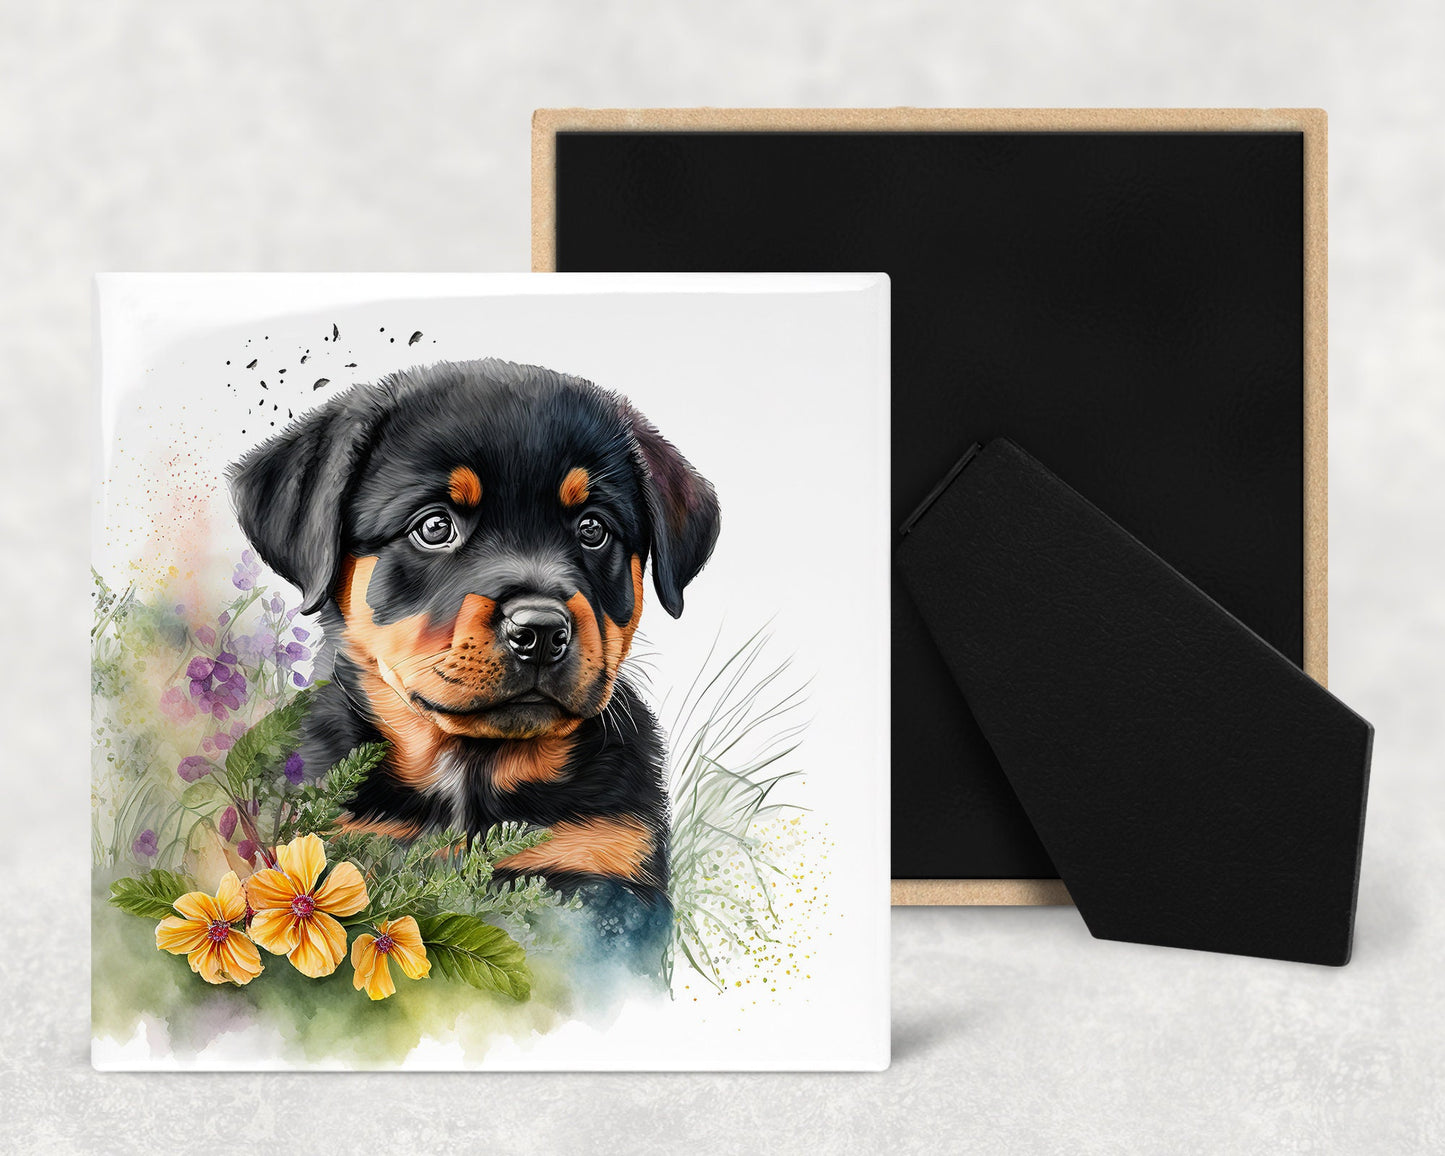 Cute Rottweiler Puppy Art Decorative Ceramic Tile Set with Optional Easel Back - Available in 4 sizes - Set of 4